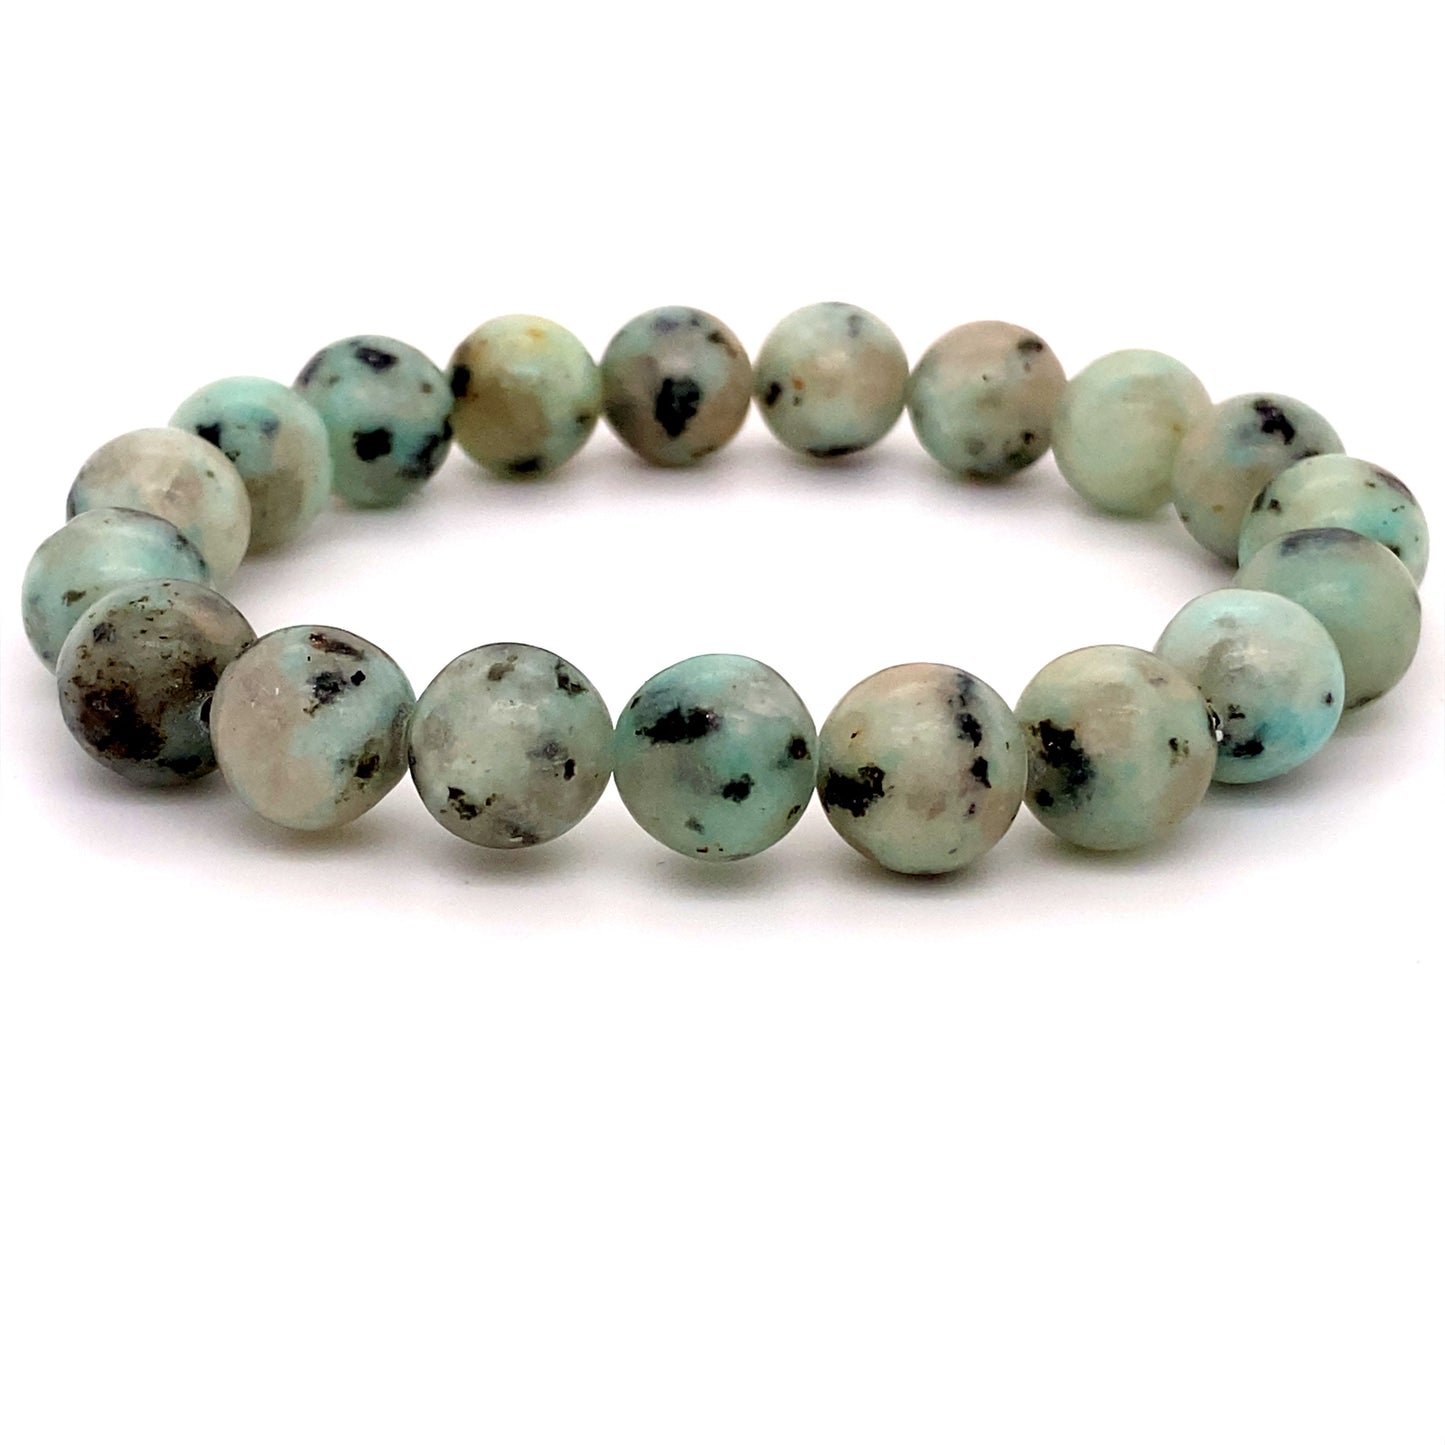 
                  
                    A 4mm Beaded Stone Bracelet made of kiwi jasper beads, recognized as a healing stone, with varying shades of pale green and black speckles, arranged in a circular shape on a white background.
                  
                